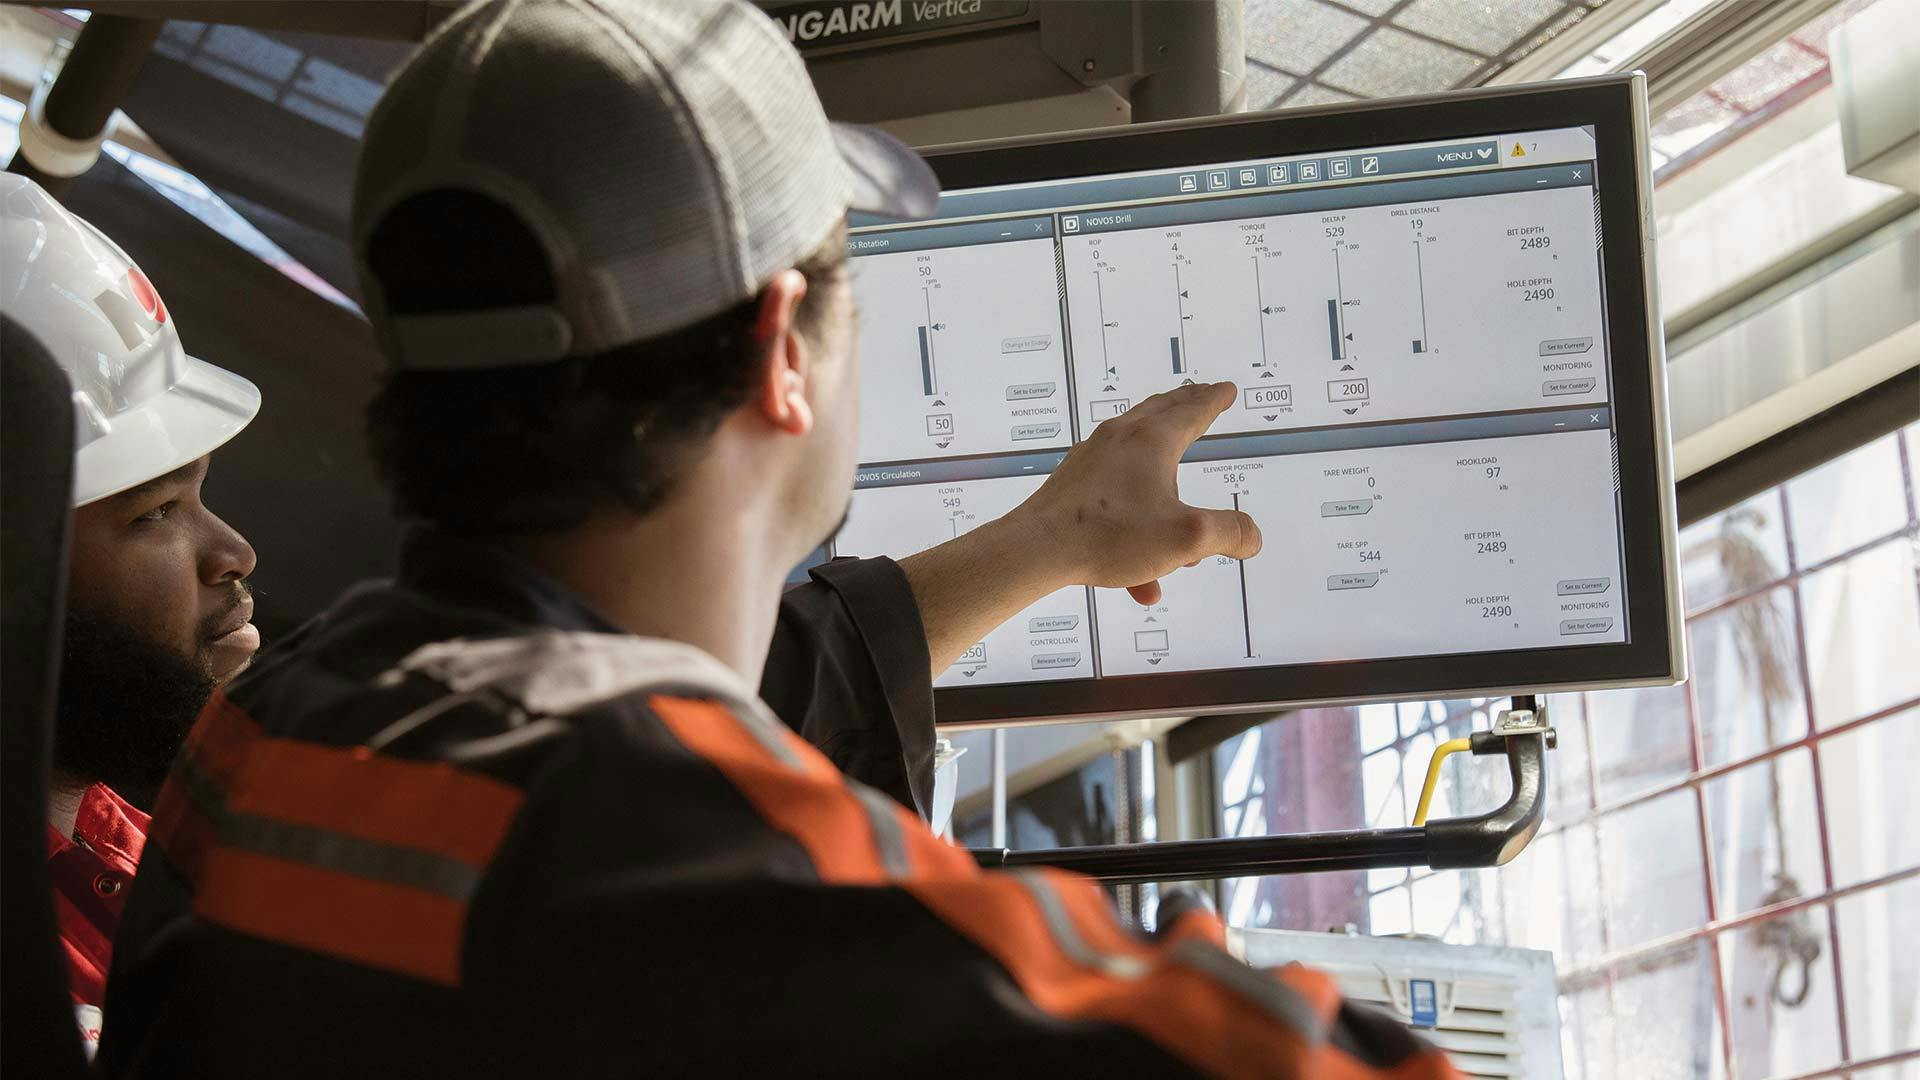 A rigger points to a screen running the NOVOS software system